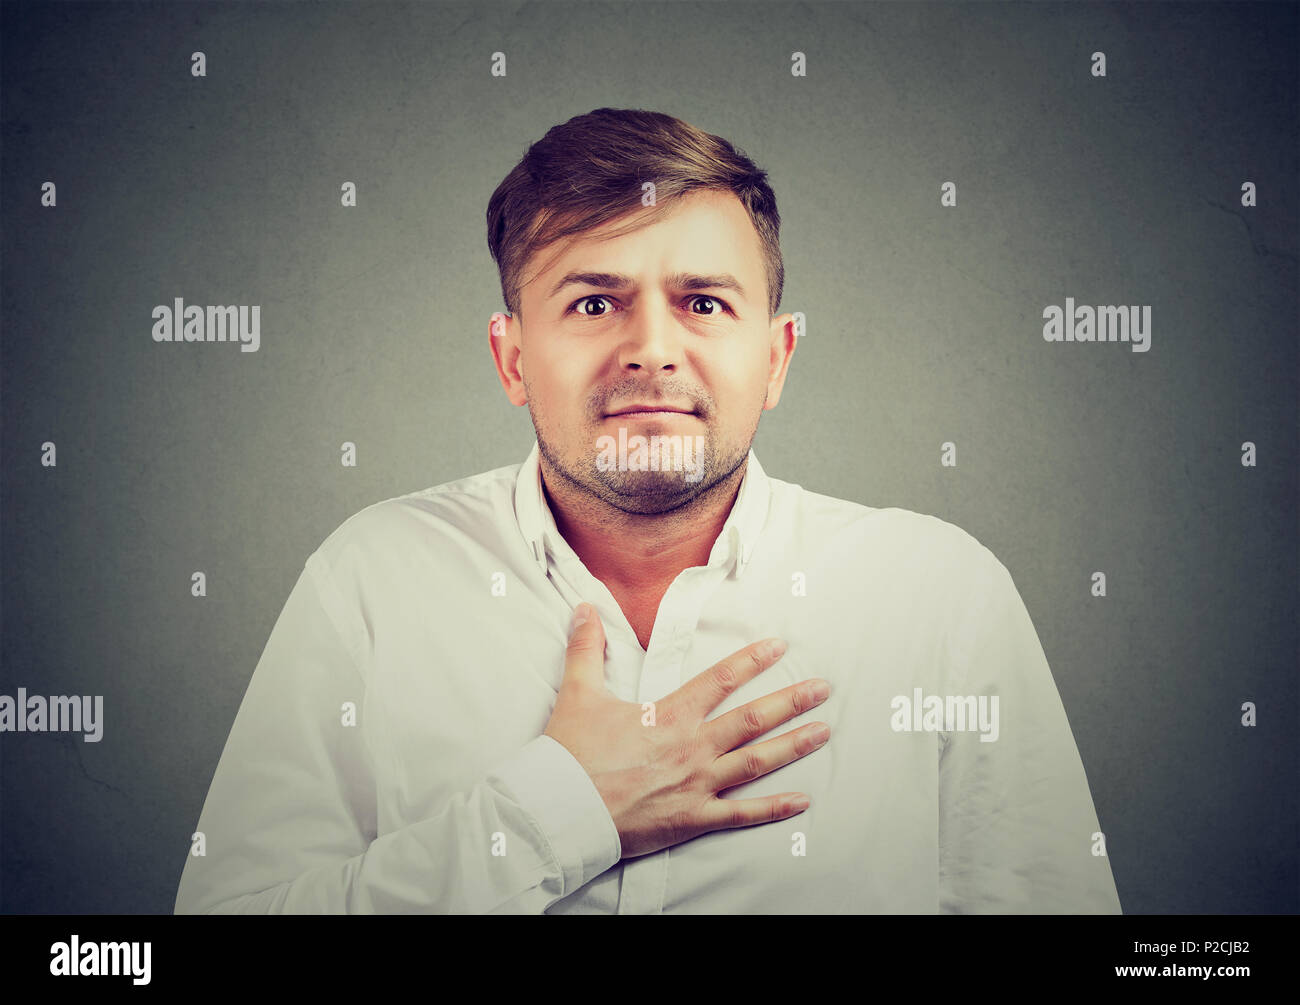 Young man holding hand on chest and apologizing with expression of regret and guilt on face Stock Photo